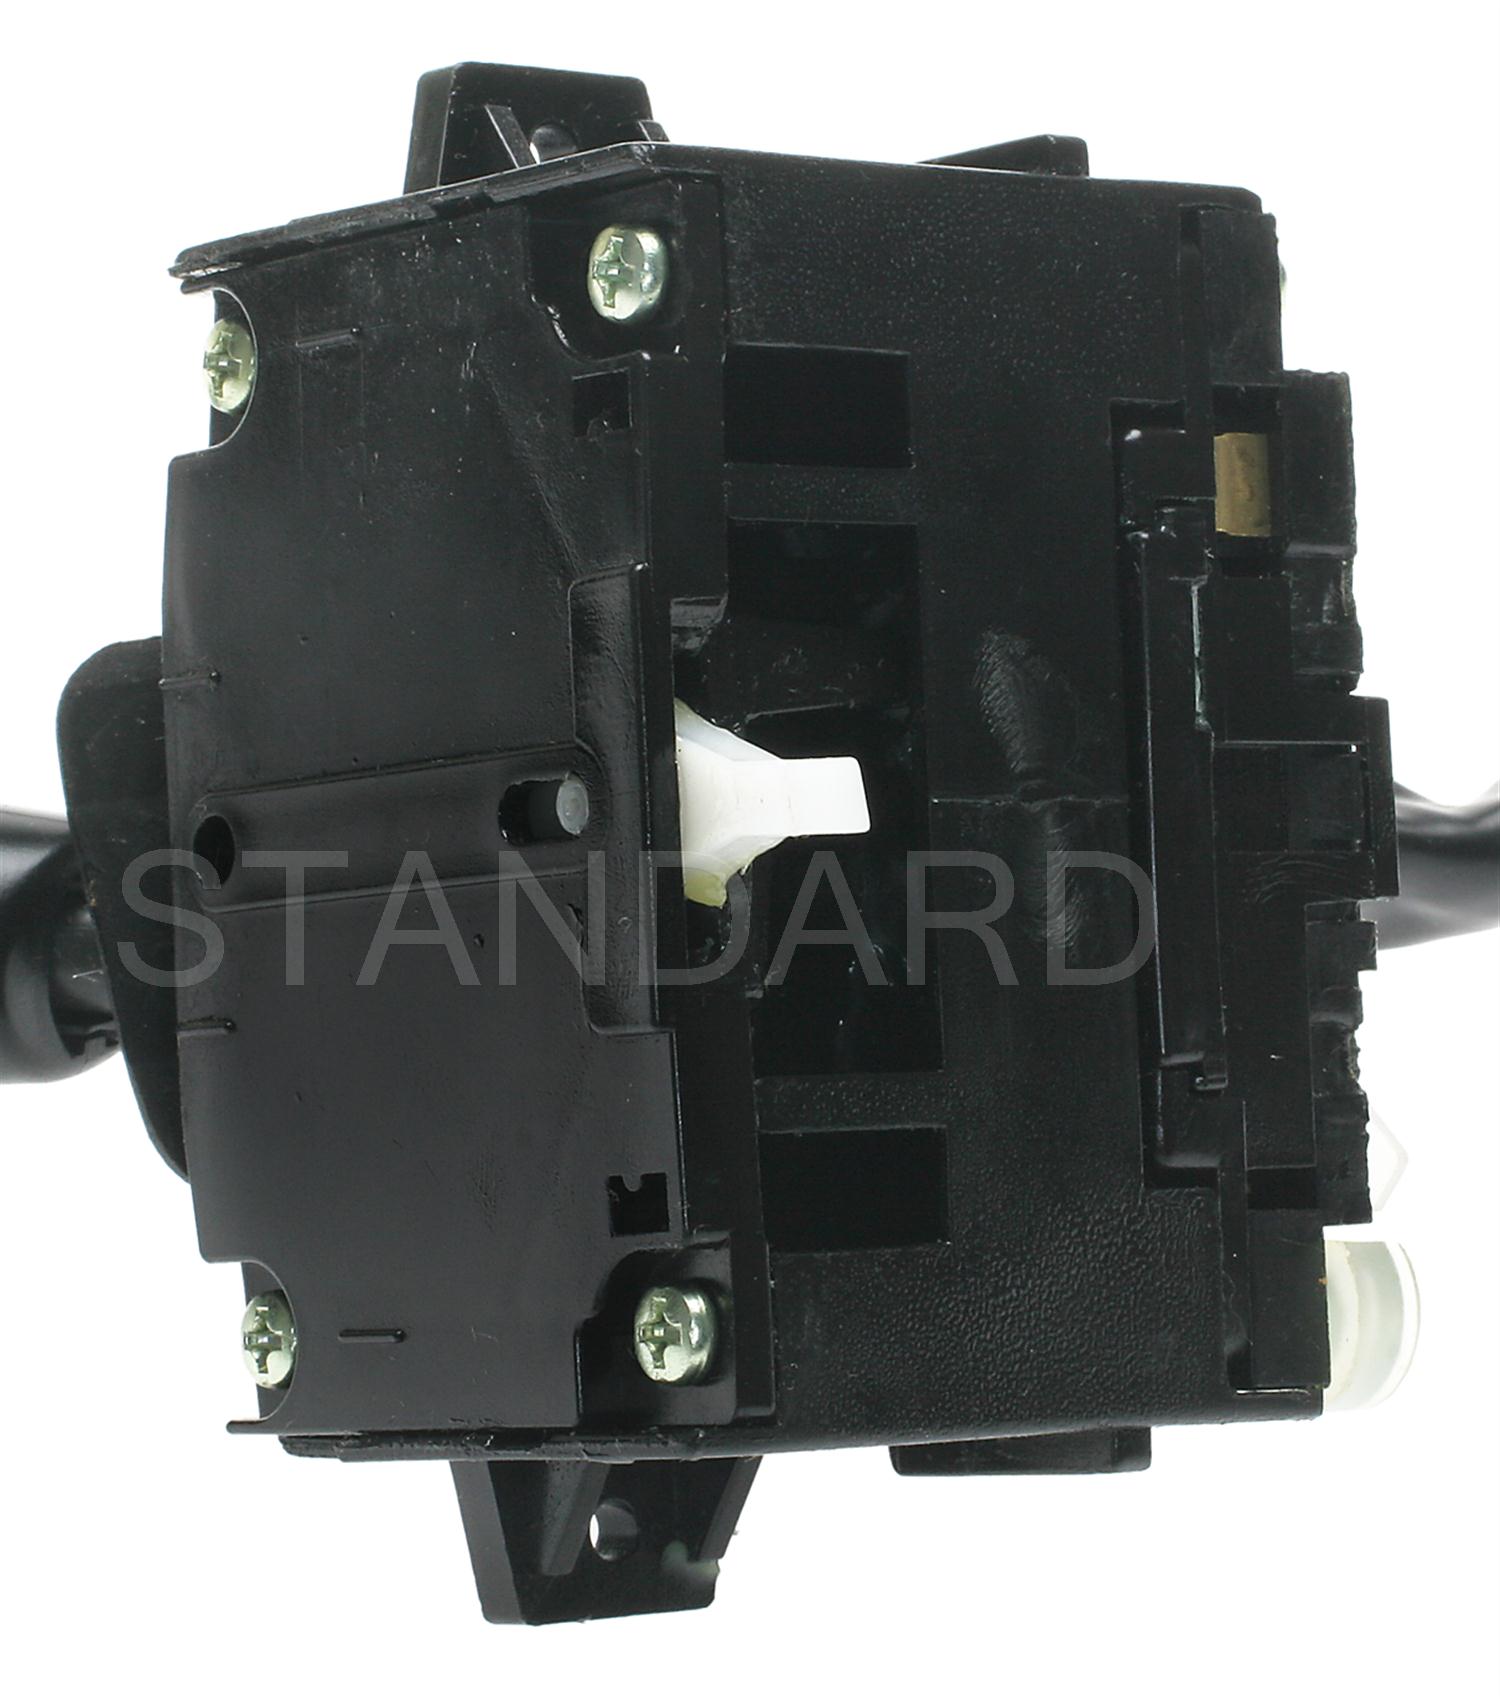 Show details for Standard Motor Products CBS1195 Standard Motor Products Cbs-1195 Combination Switch